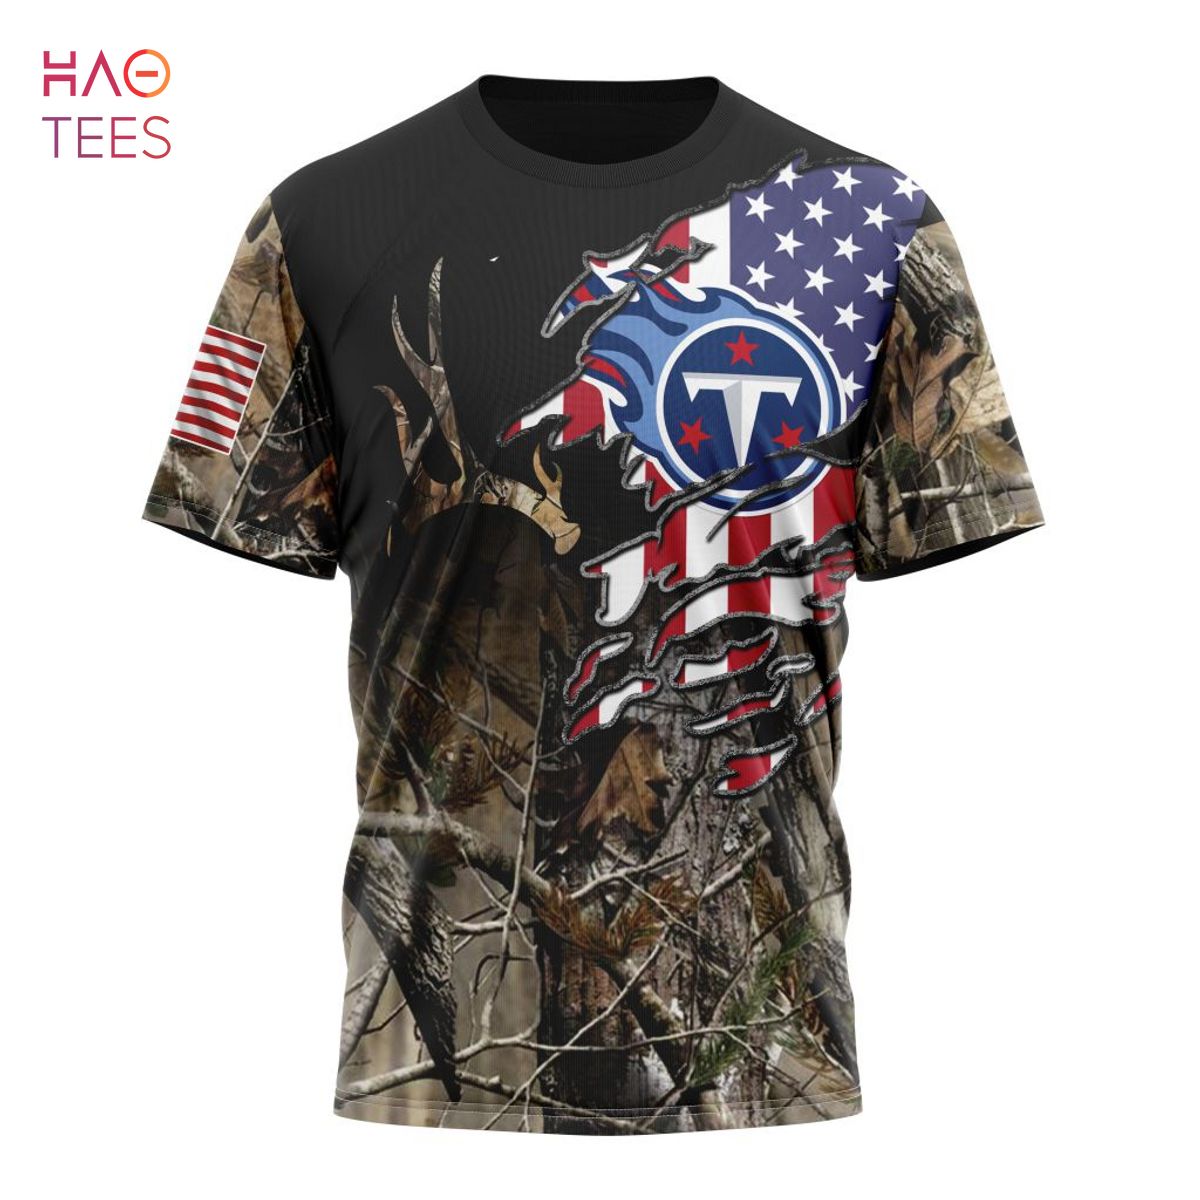 BEST NFL Tennessee Titans Special Camo Realtree Hunting 3D Hoodie